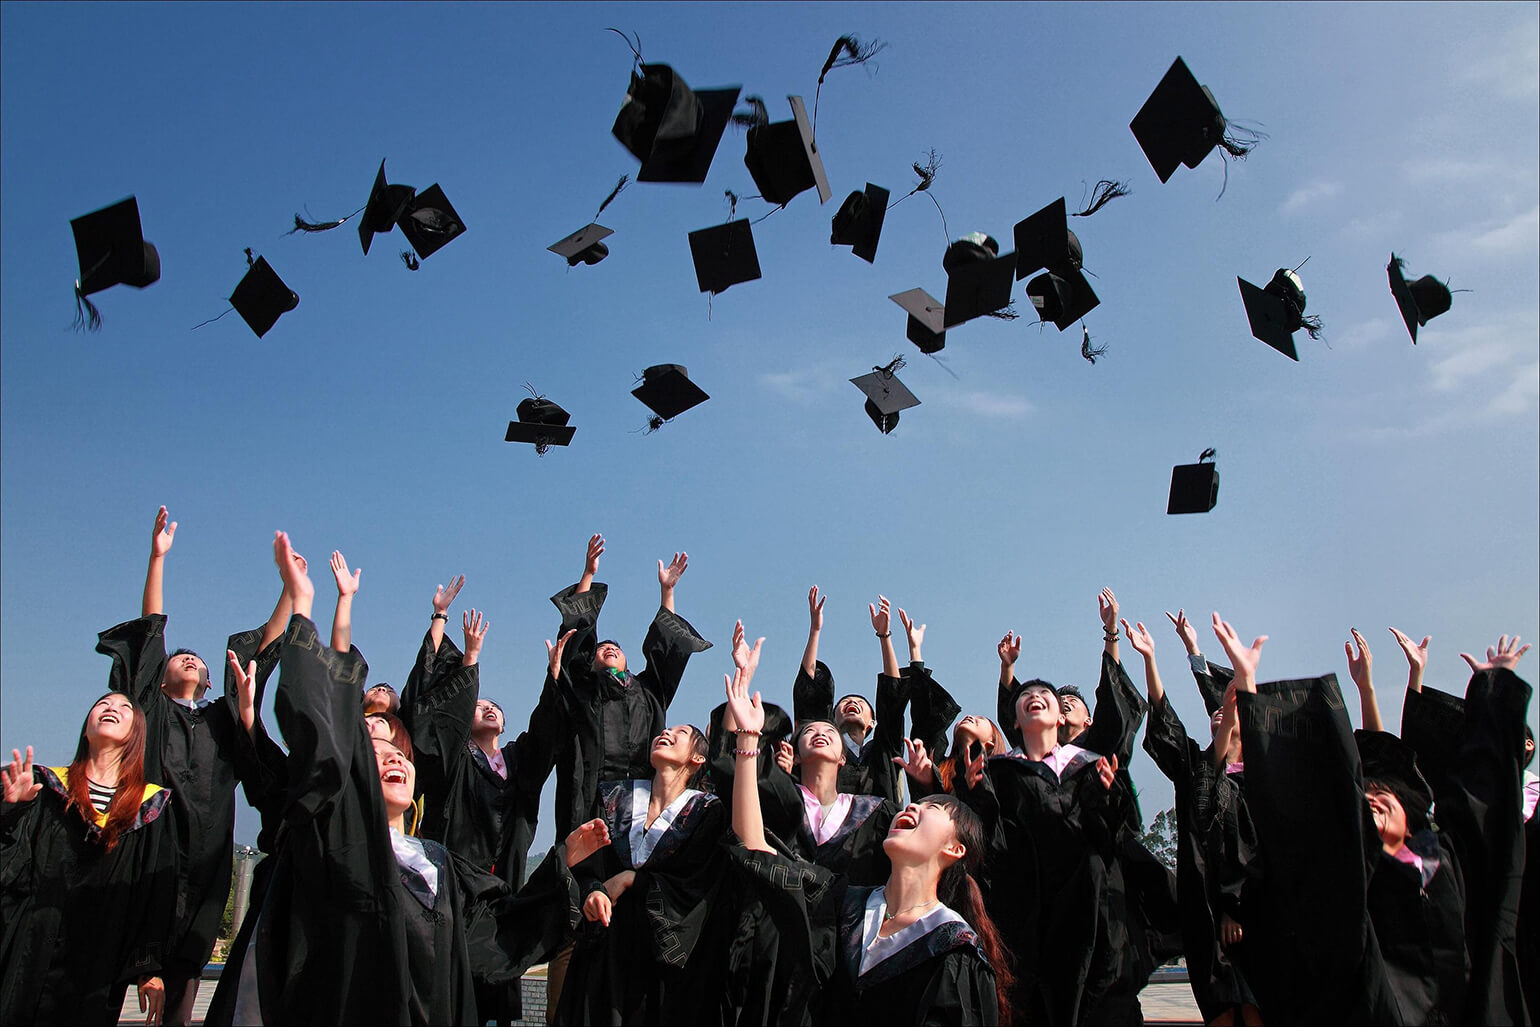 A large group of students wearing black graduation gowns. They are outside, throwing their caps into the air, celebrating their graduation.